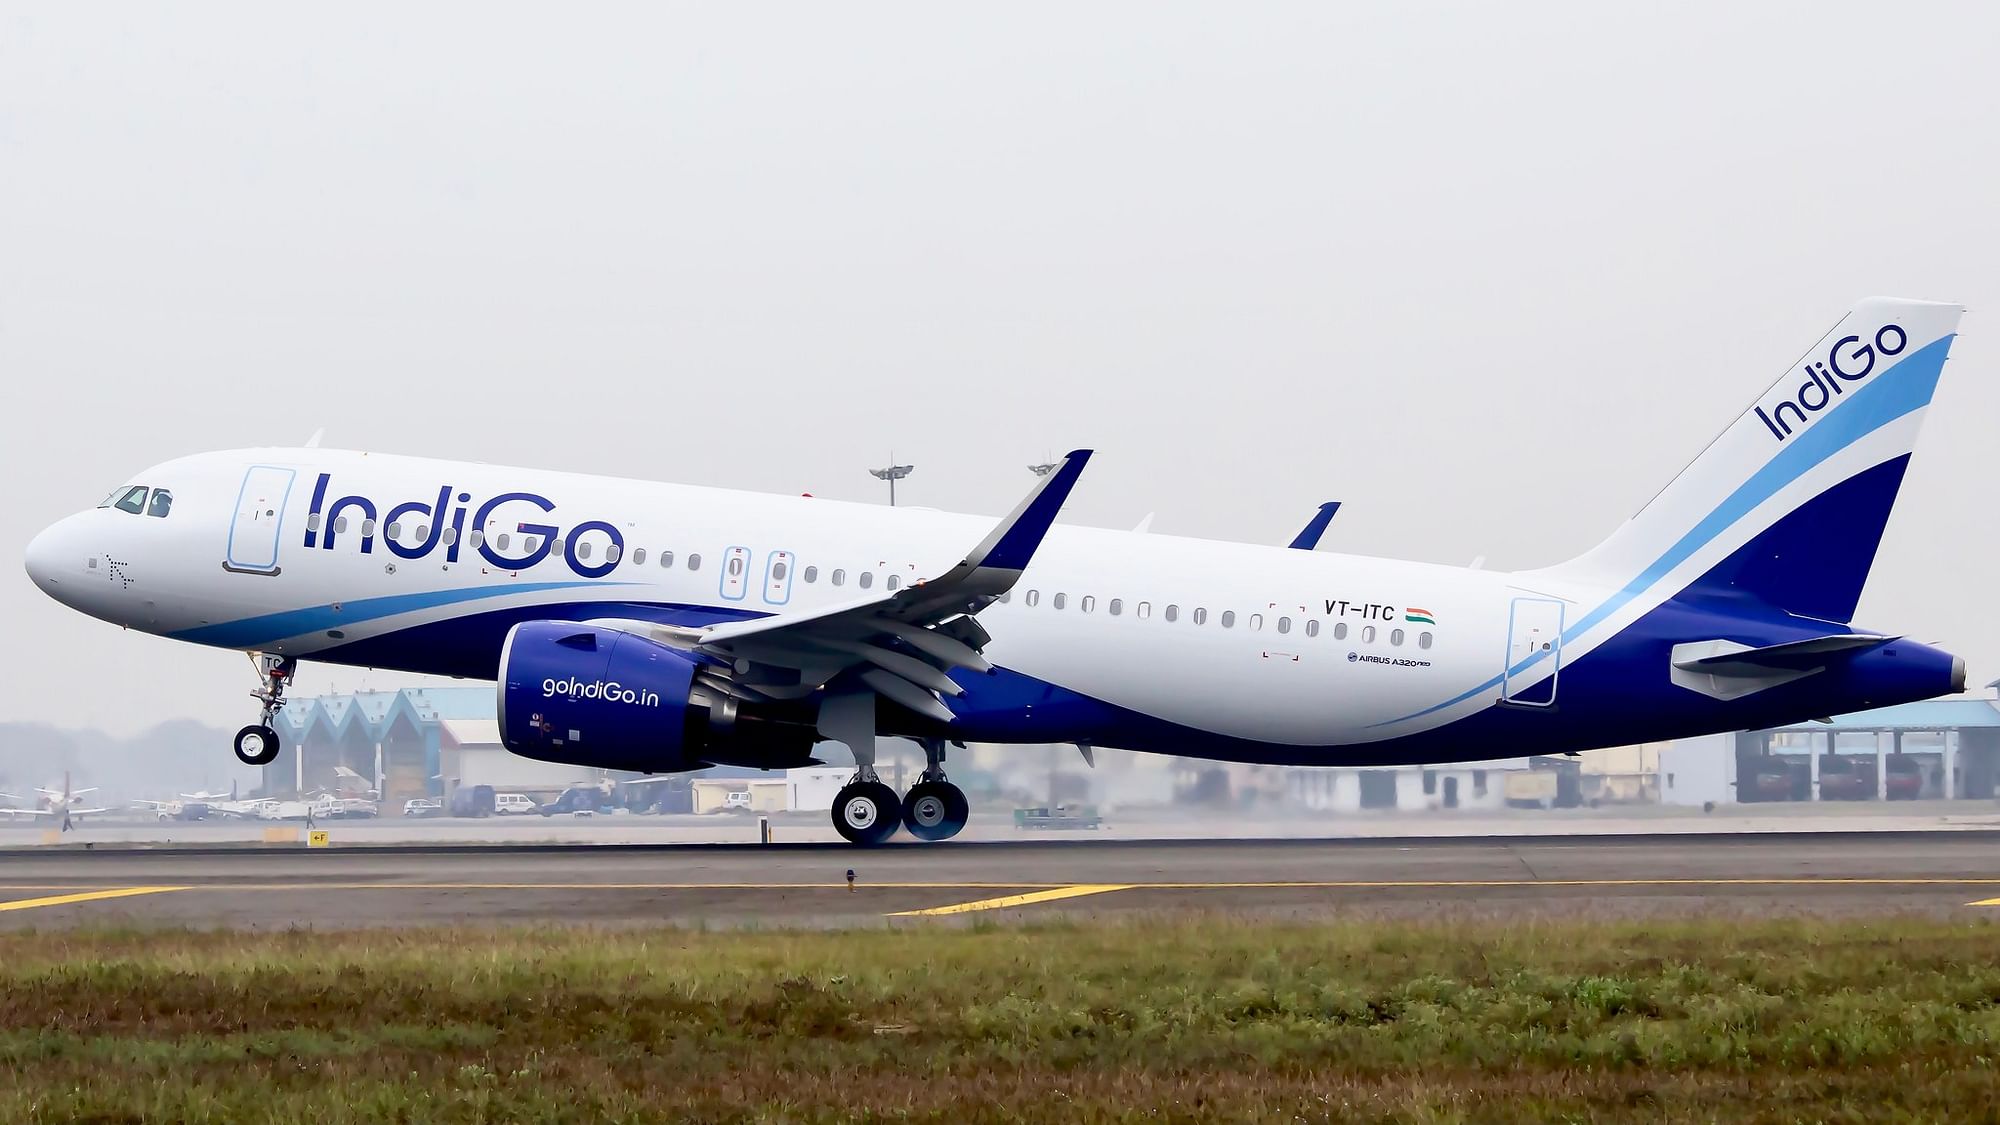 <div class="paragraphs"><p>An official of the Airports Authority of India (AAI) told PTI that the Indigo 6E757 flight operating on the Jorhat-Kolkata route was cancelled after being held up for several hours at Jorhat due to a "technical issue".</p><p></p><p>(Image used for representation only.)</p></div>